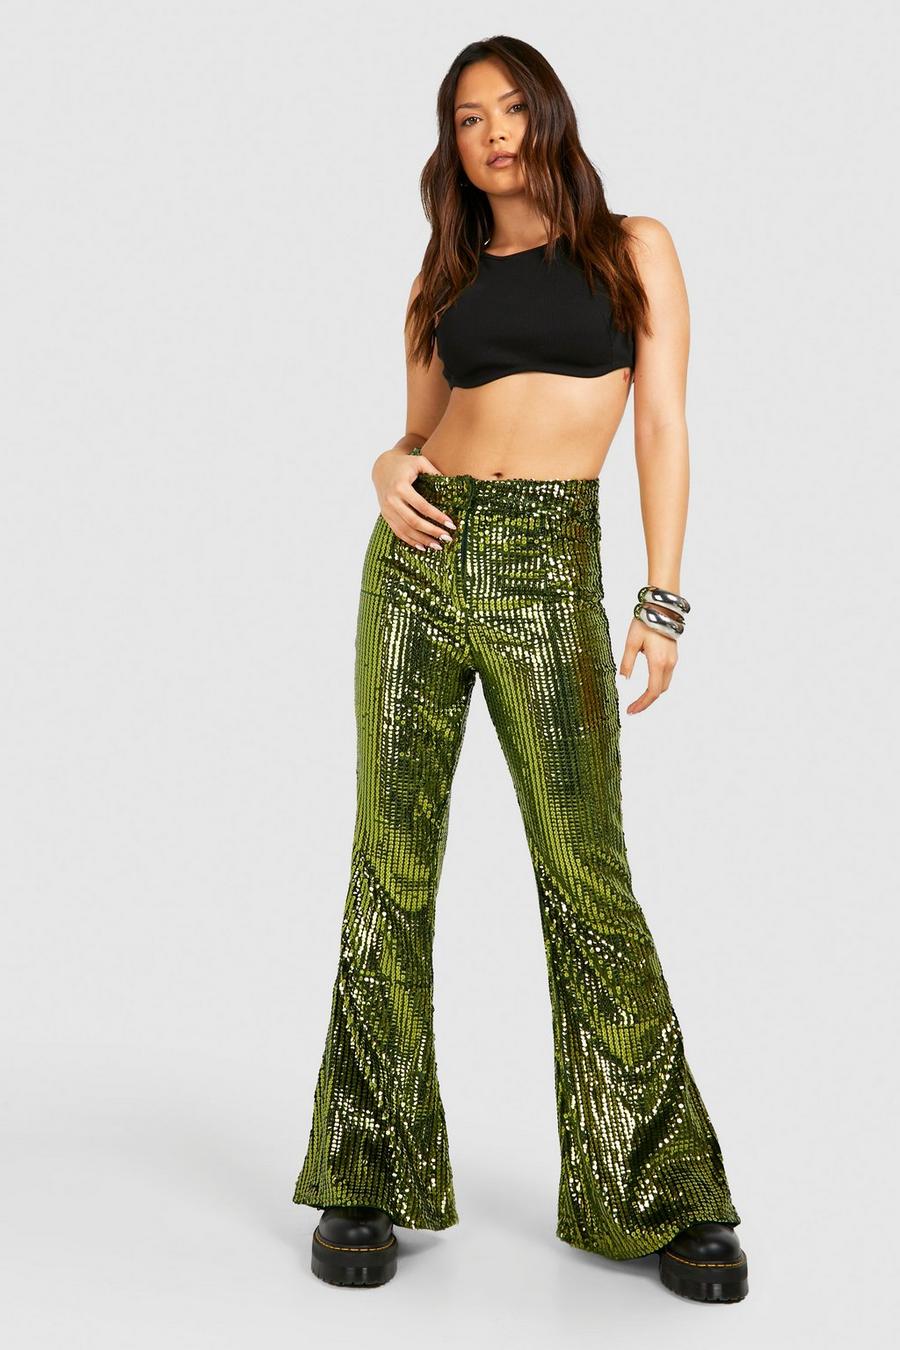 Chartreuse Festival High Waist Sequin Flare Trousers